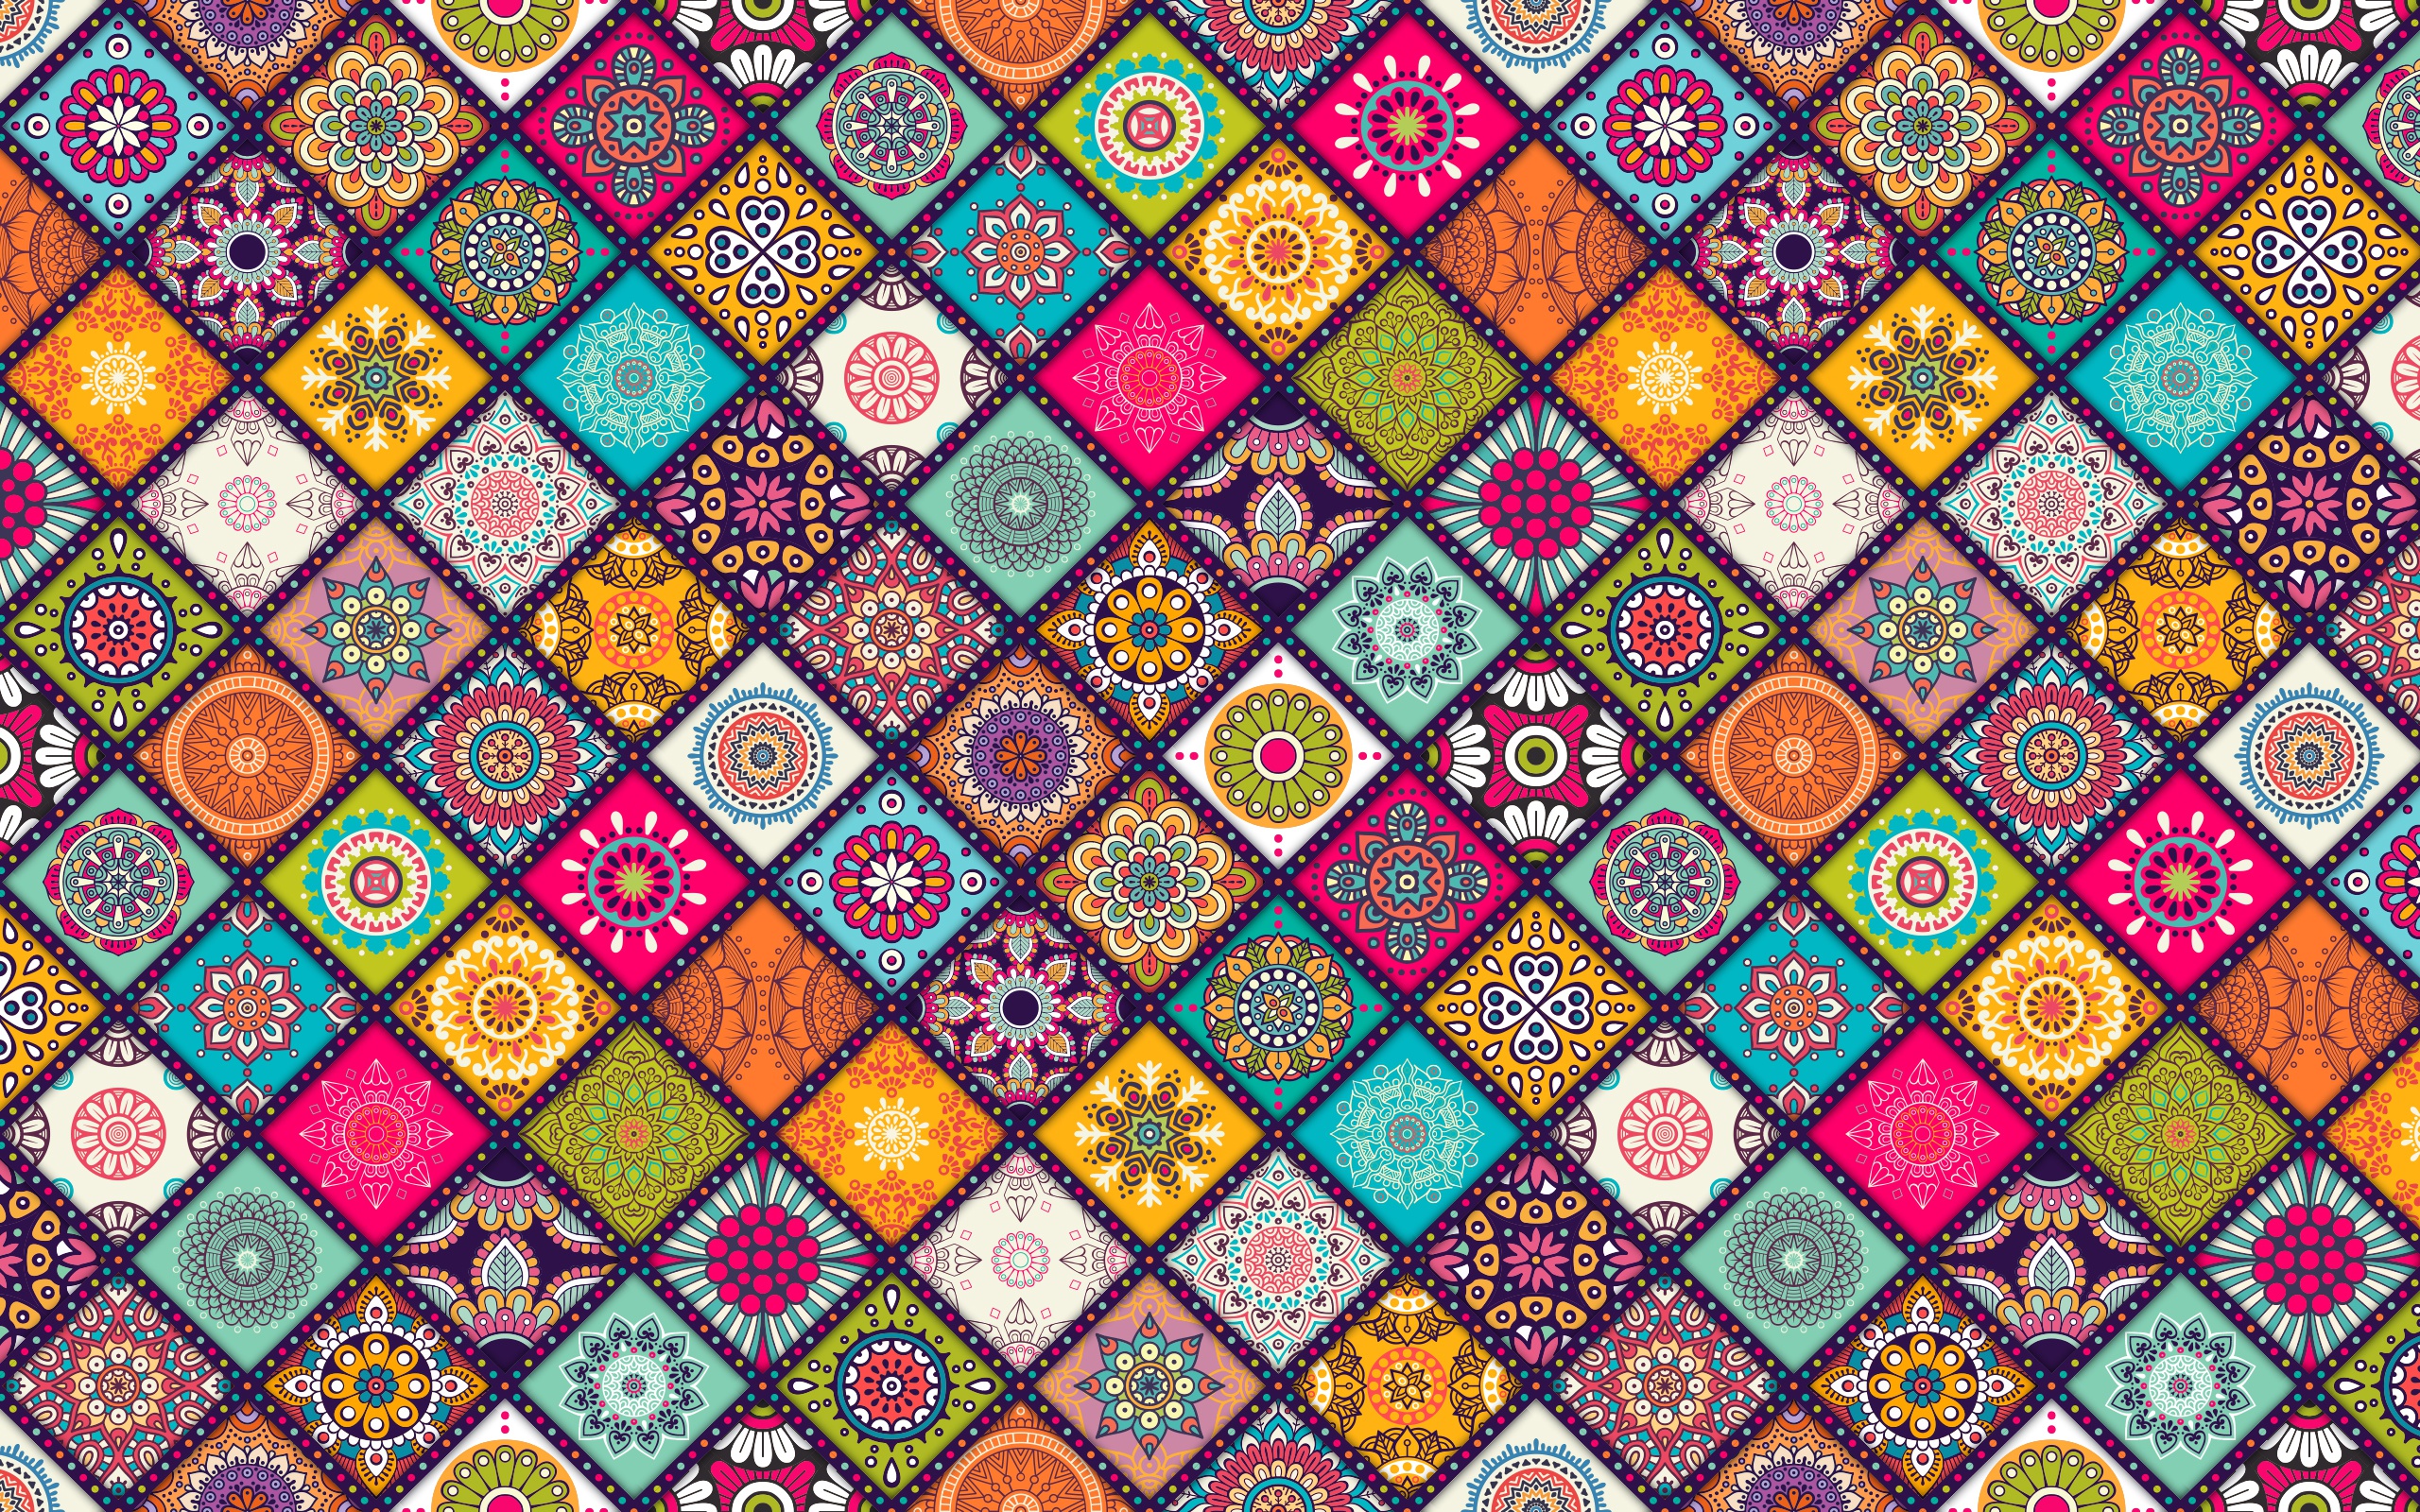 flowers, pattern, colorful, floral, artistic, flower, colors, square iphone wallpaper